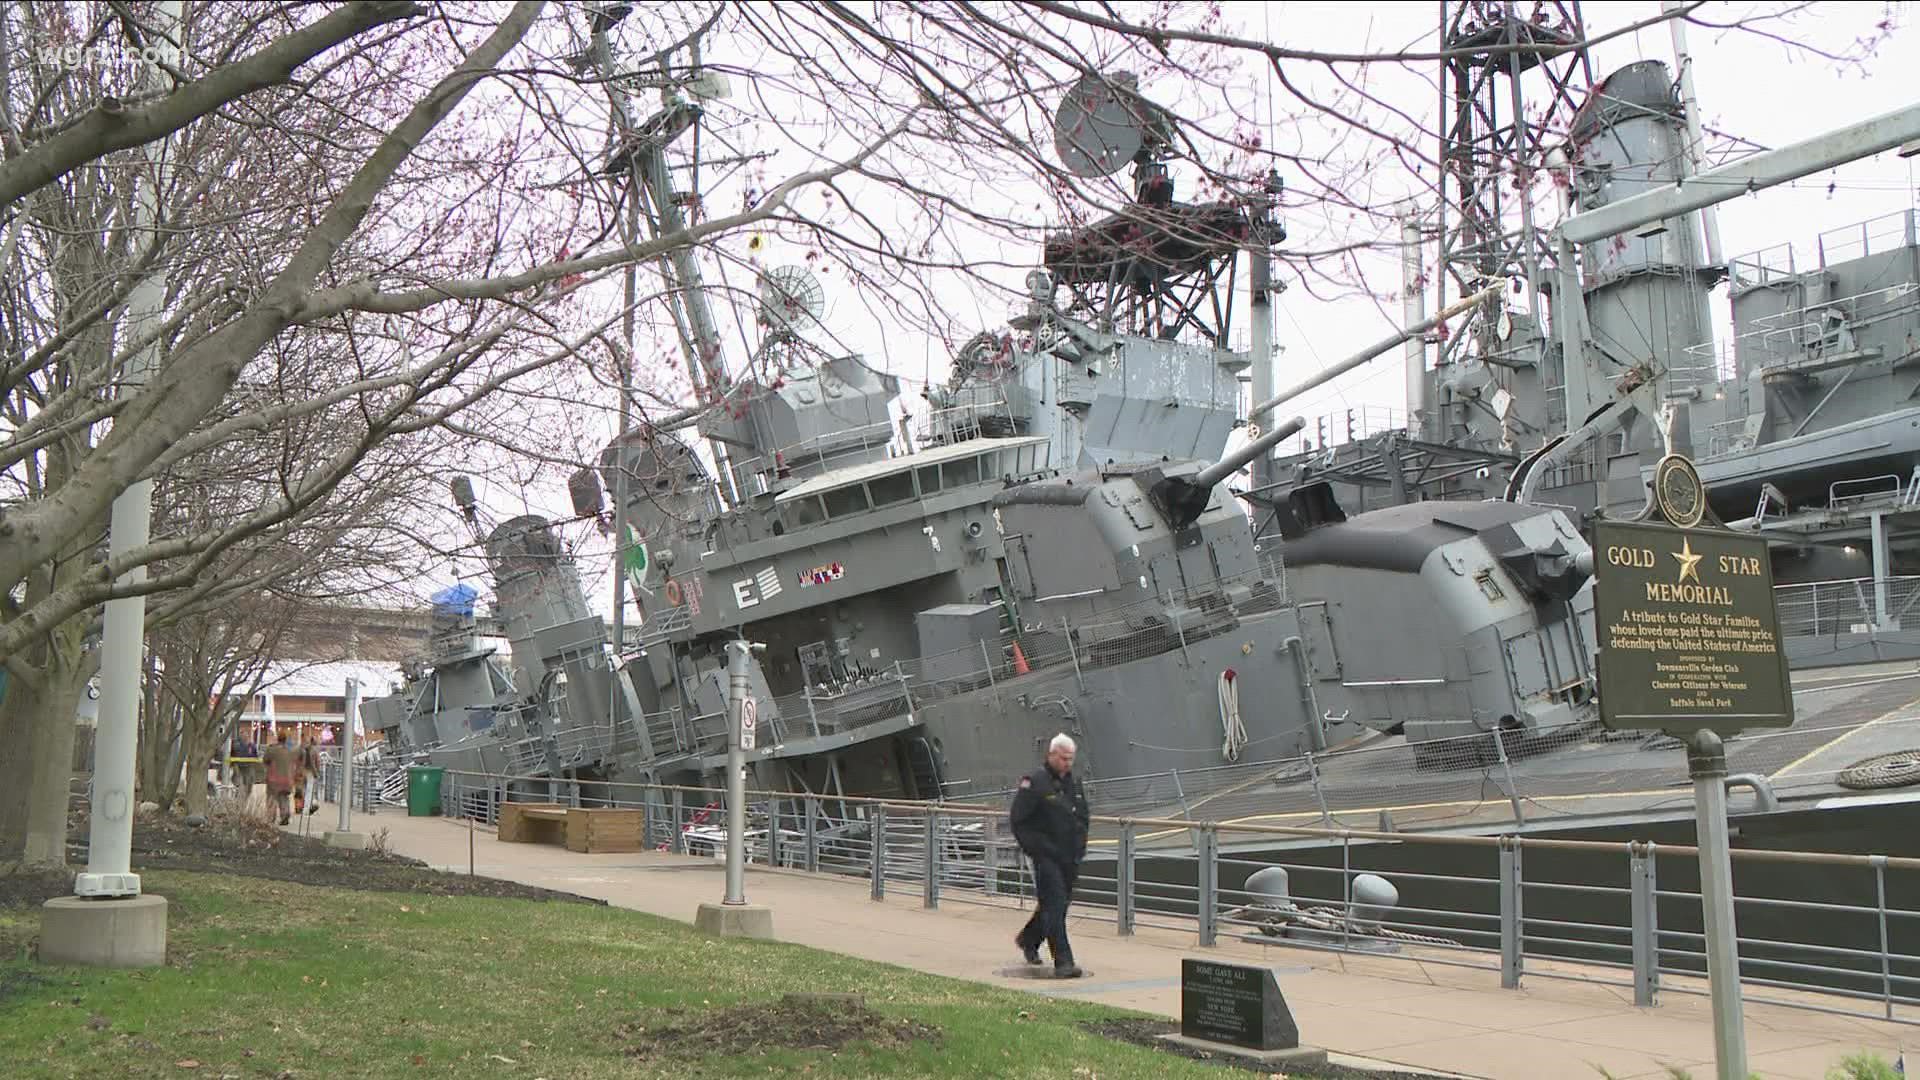 The decommissioned destroyer continues to take on water and is badly listing to the side at the Buffalo and Erie County Naval & Military Park.